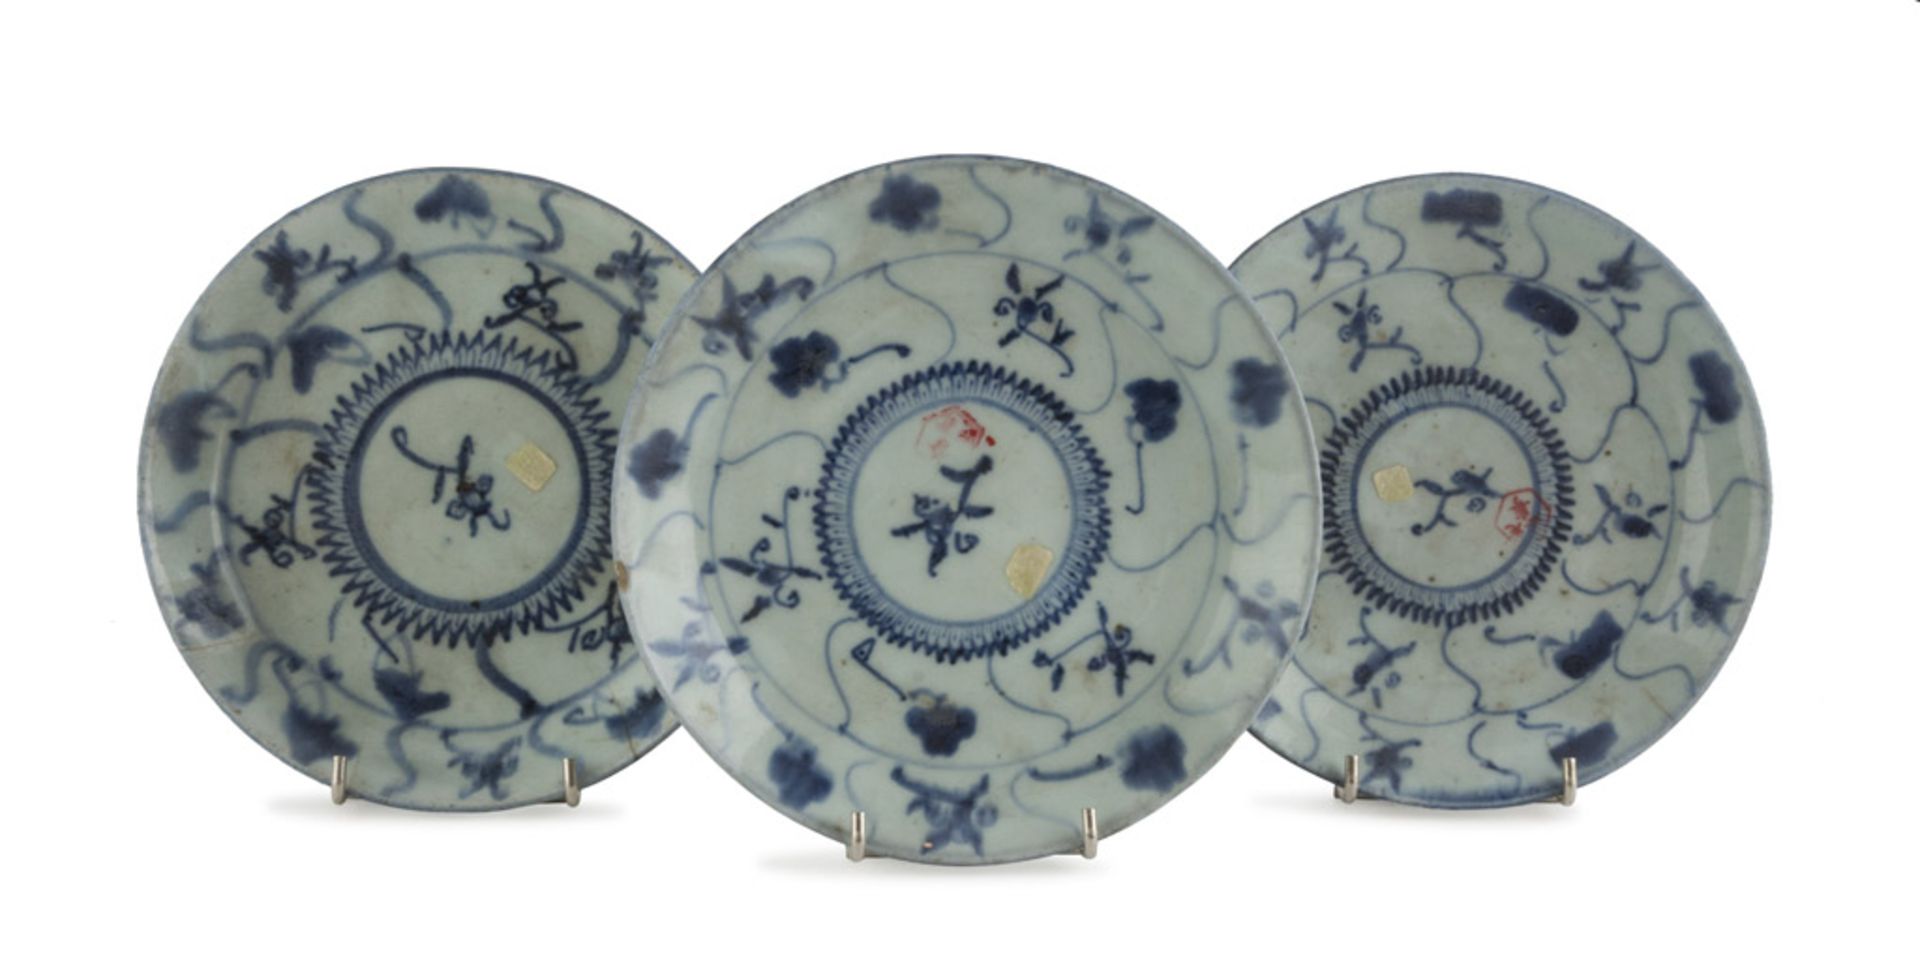 THREE BLUE AND WHITE PORCELAIN DISHES, CHINA 19TH CENTURY decorated with floral fantasies and